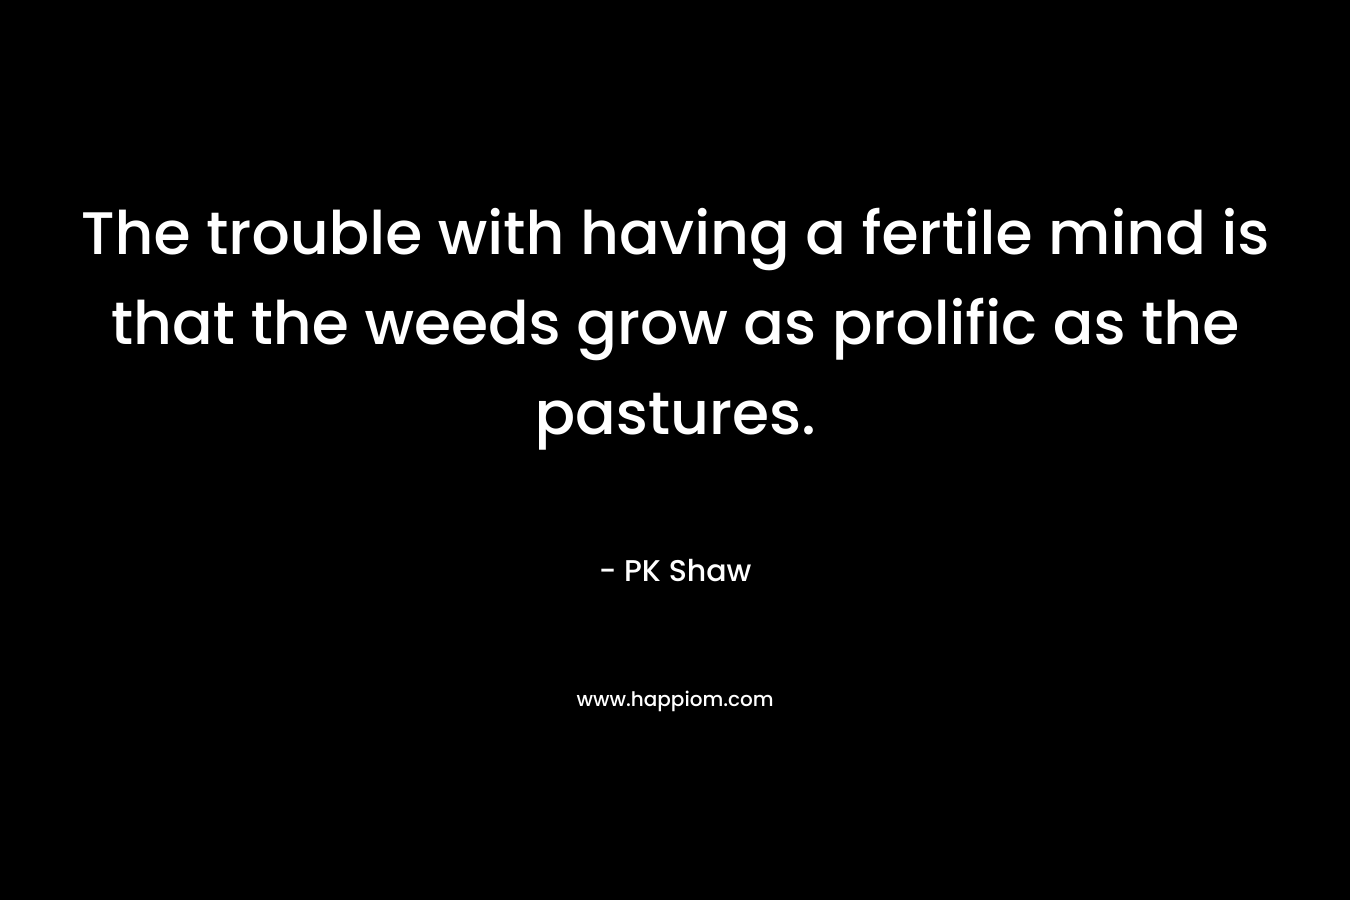 The trouble with having a fertile mind is that the weeds grow as prolific as the pastures. – PK Shaw